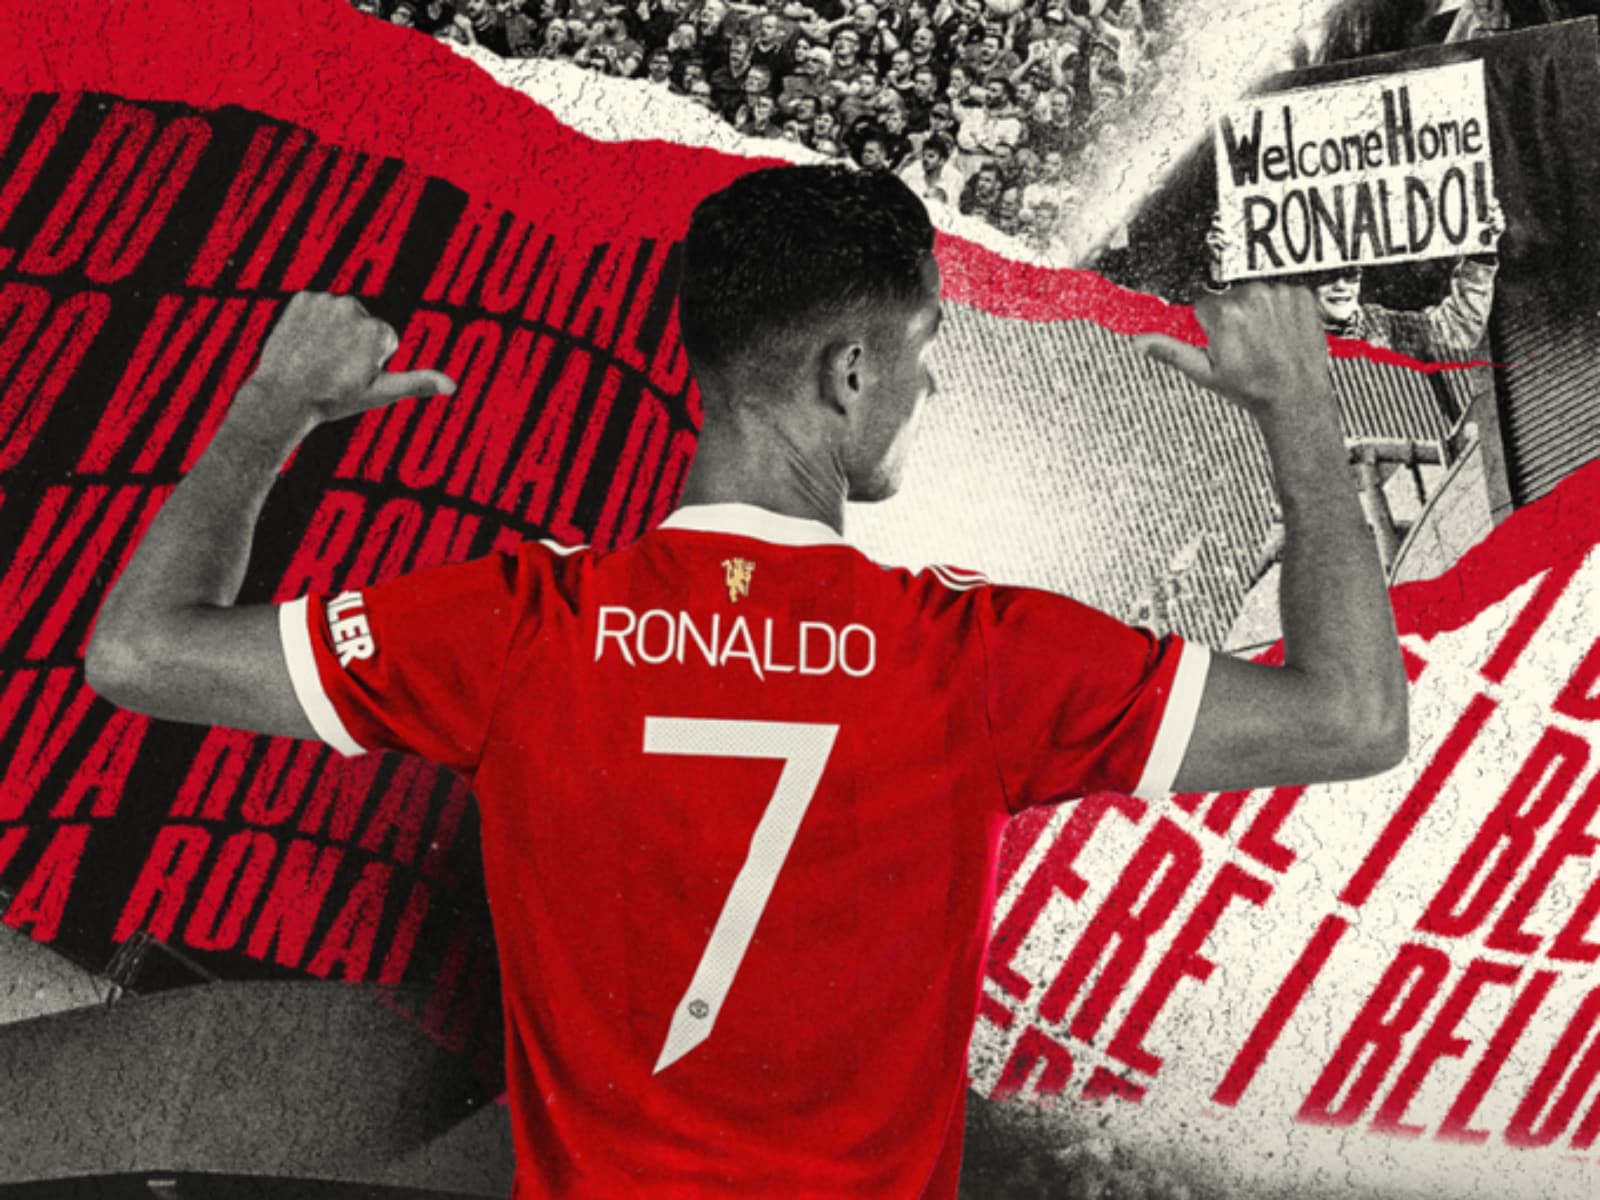 It's Official! Cristiano Ronaldo Will Wear Iconic No. 7 Jersey at Manchester United